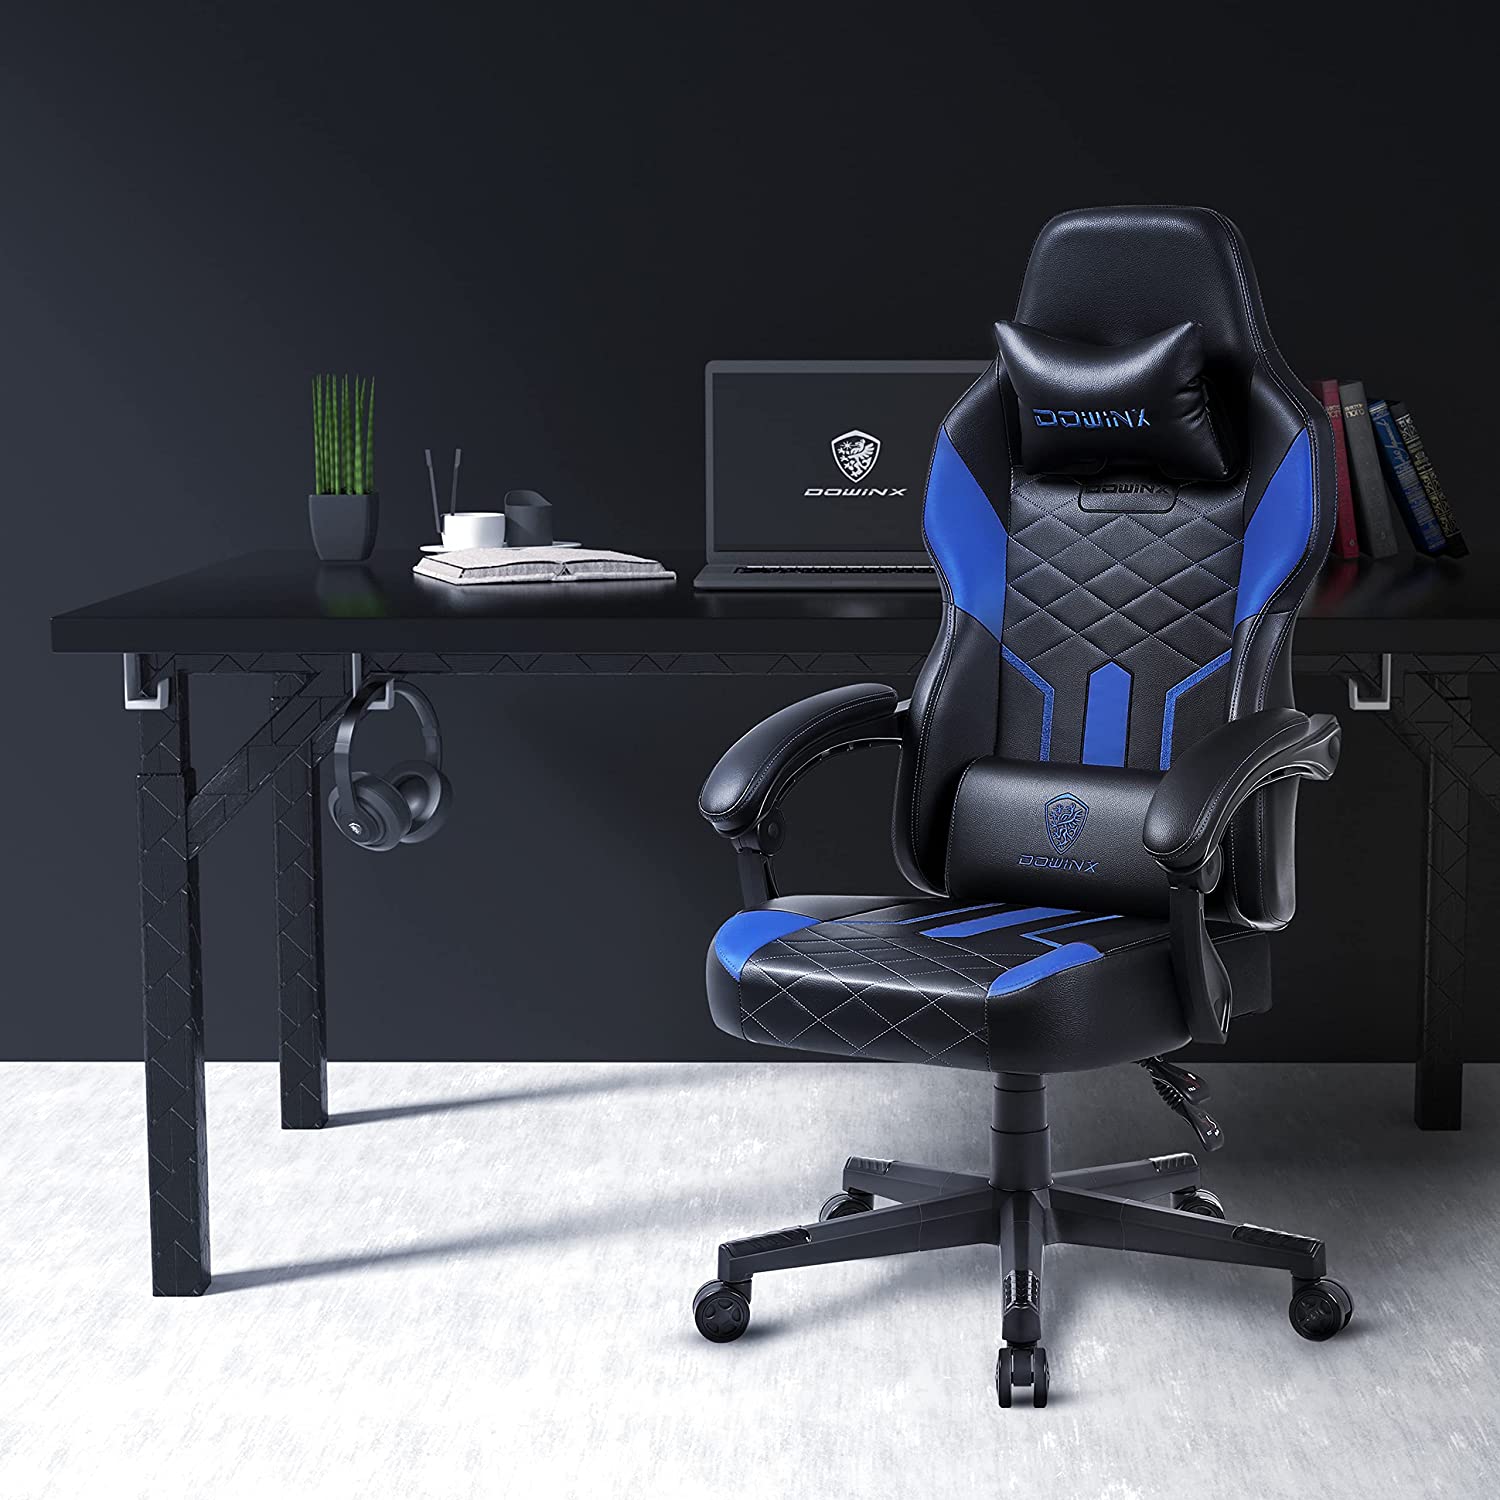 Dowinx Gaming Chair LS-6659-Blue